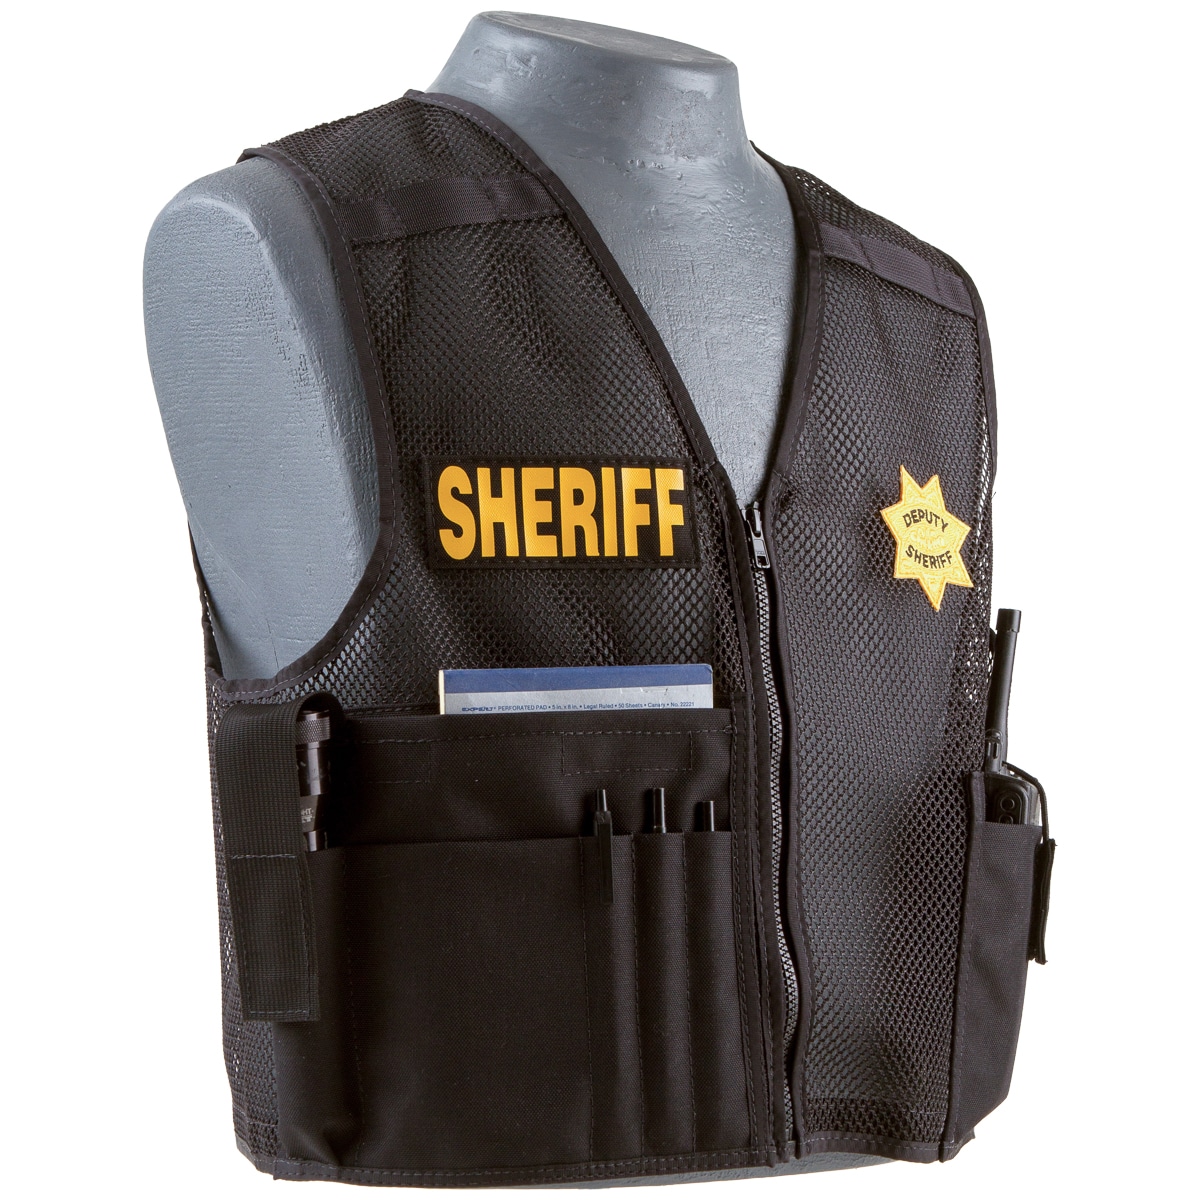 Identification Vest RC250 — Cowell Tactical - Bonners Ferry,